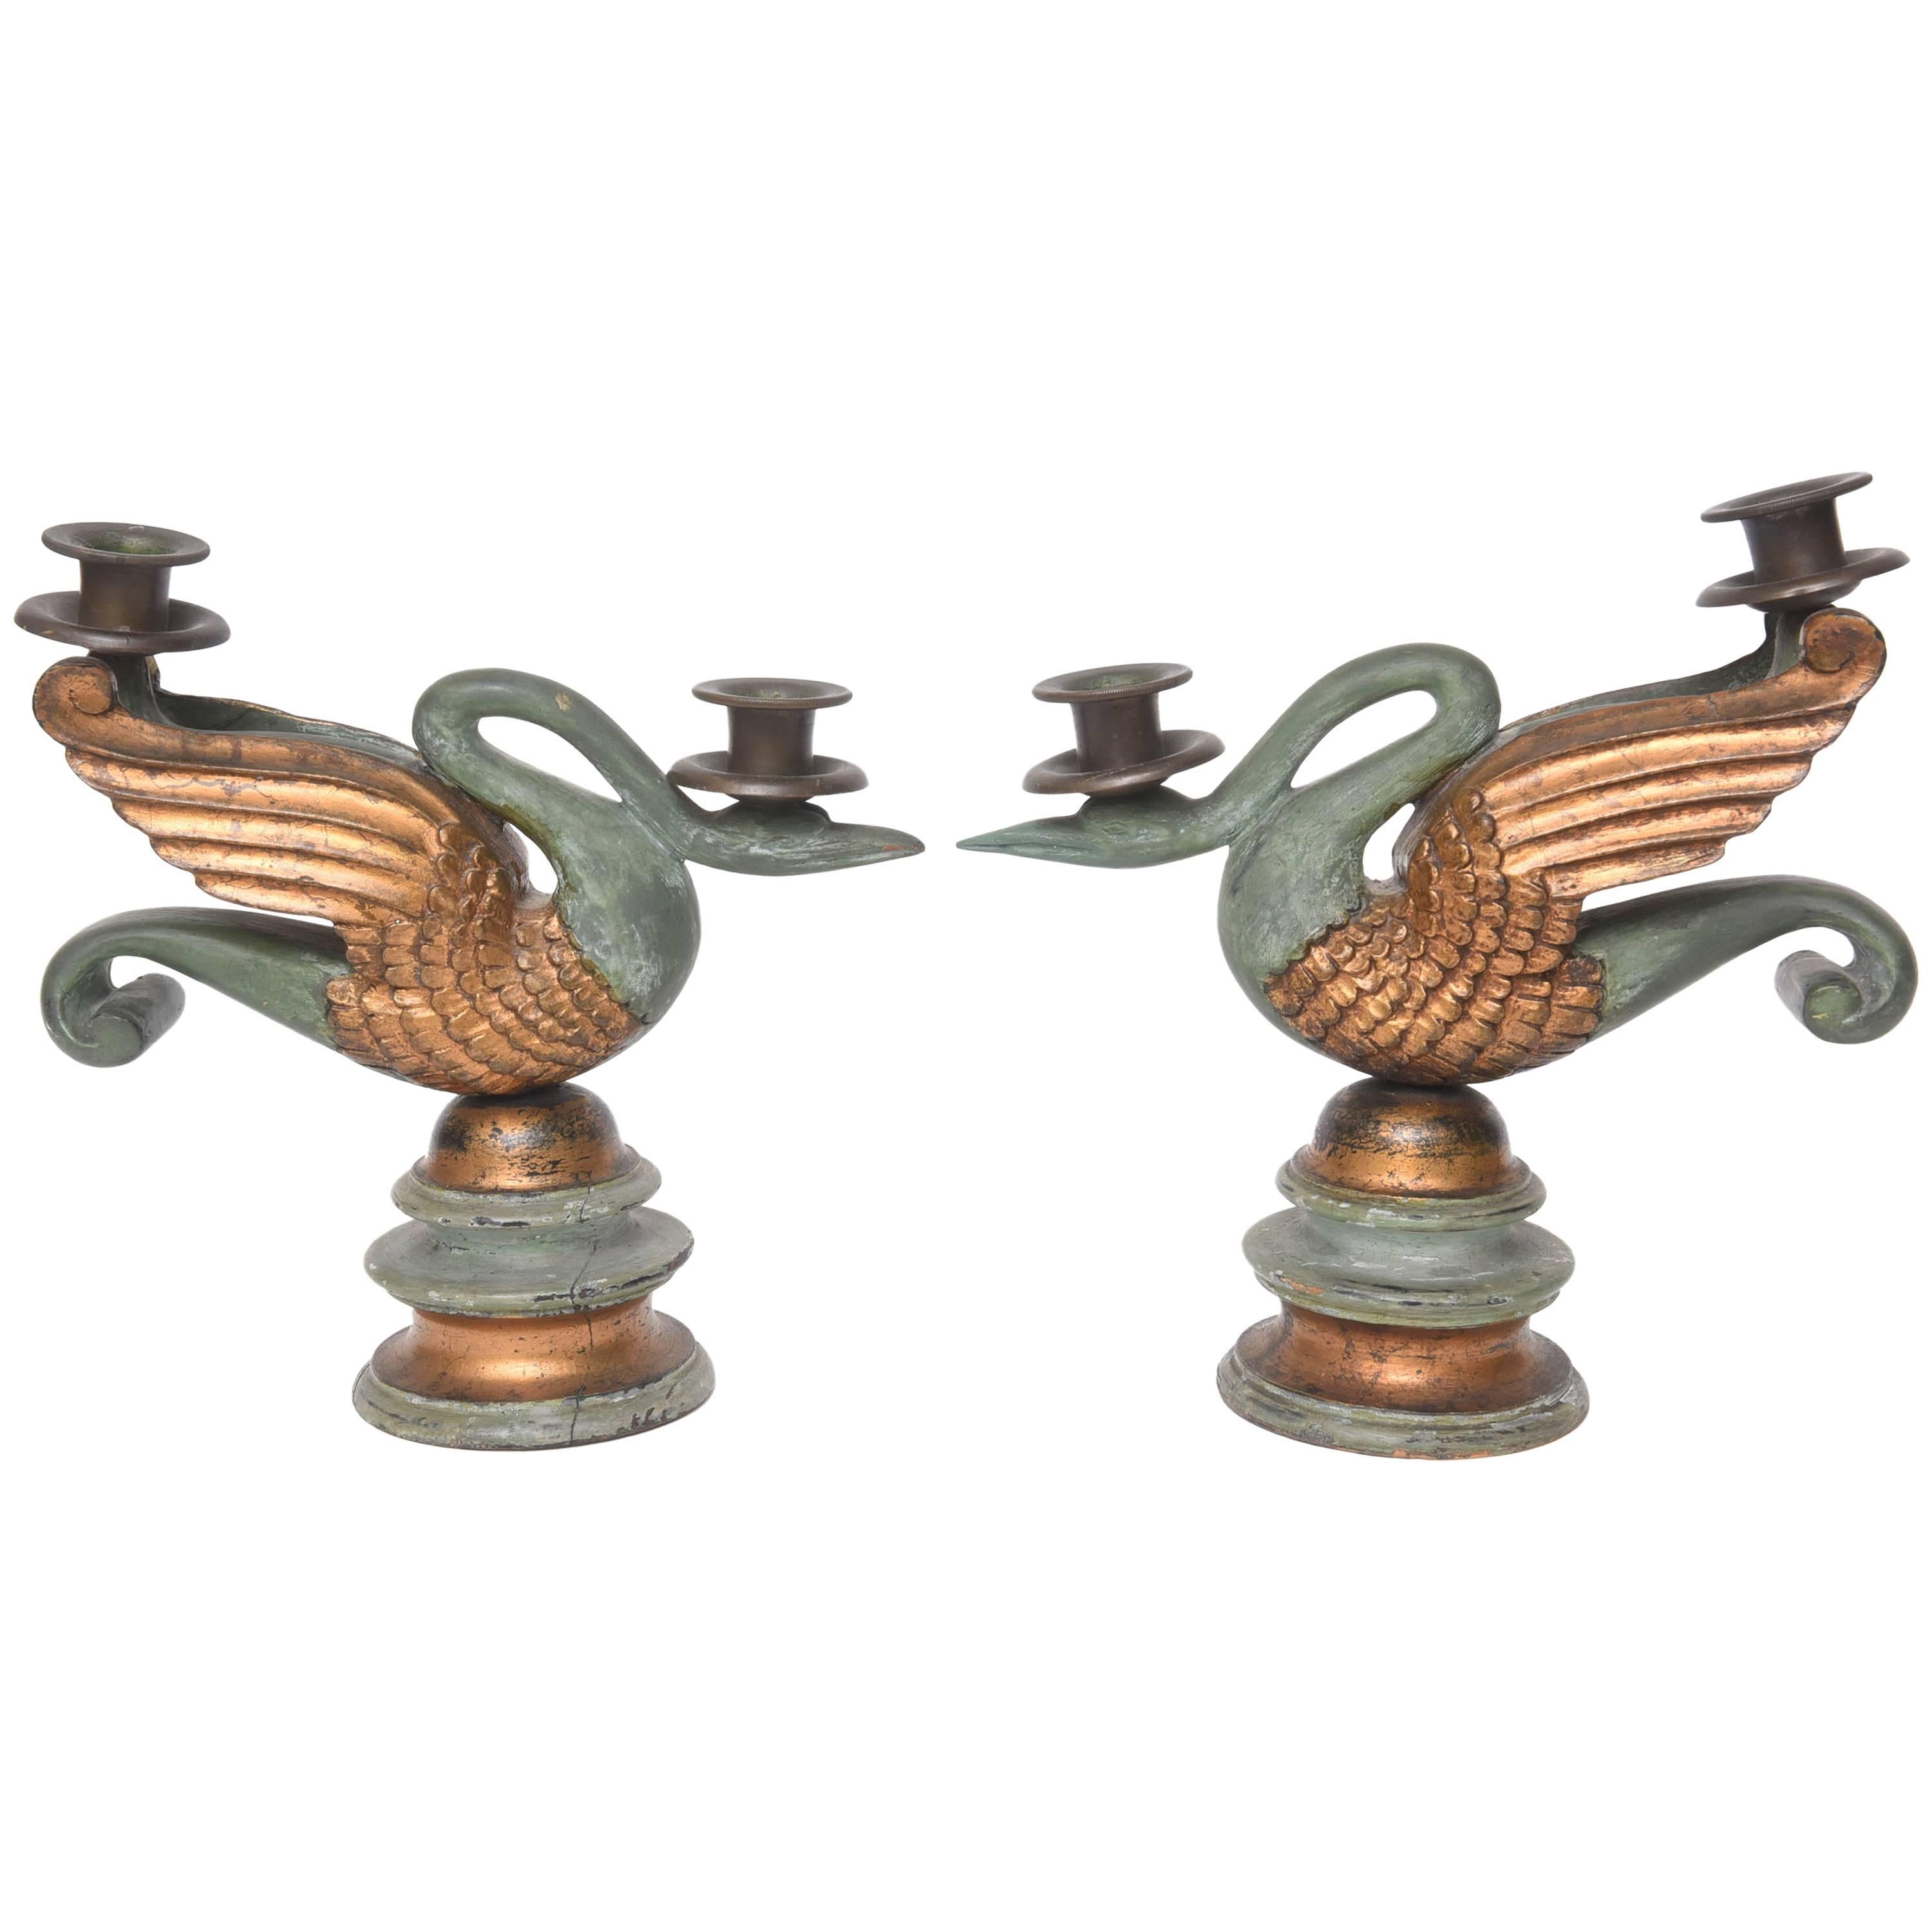 Pair of Antique Wood Carved Swan Candlesticks